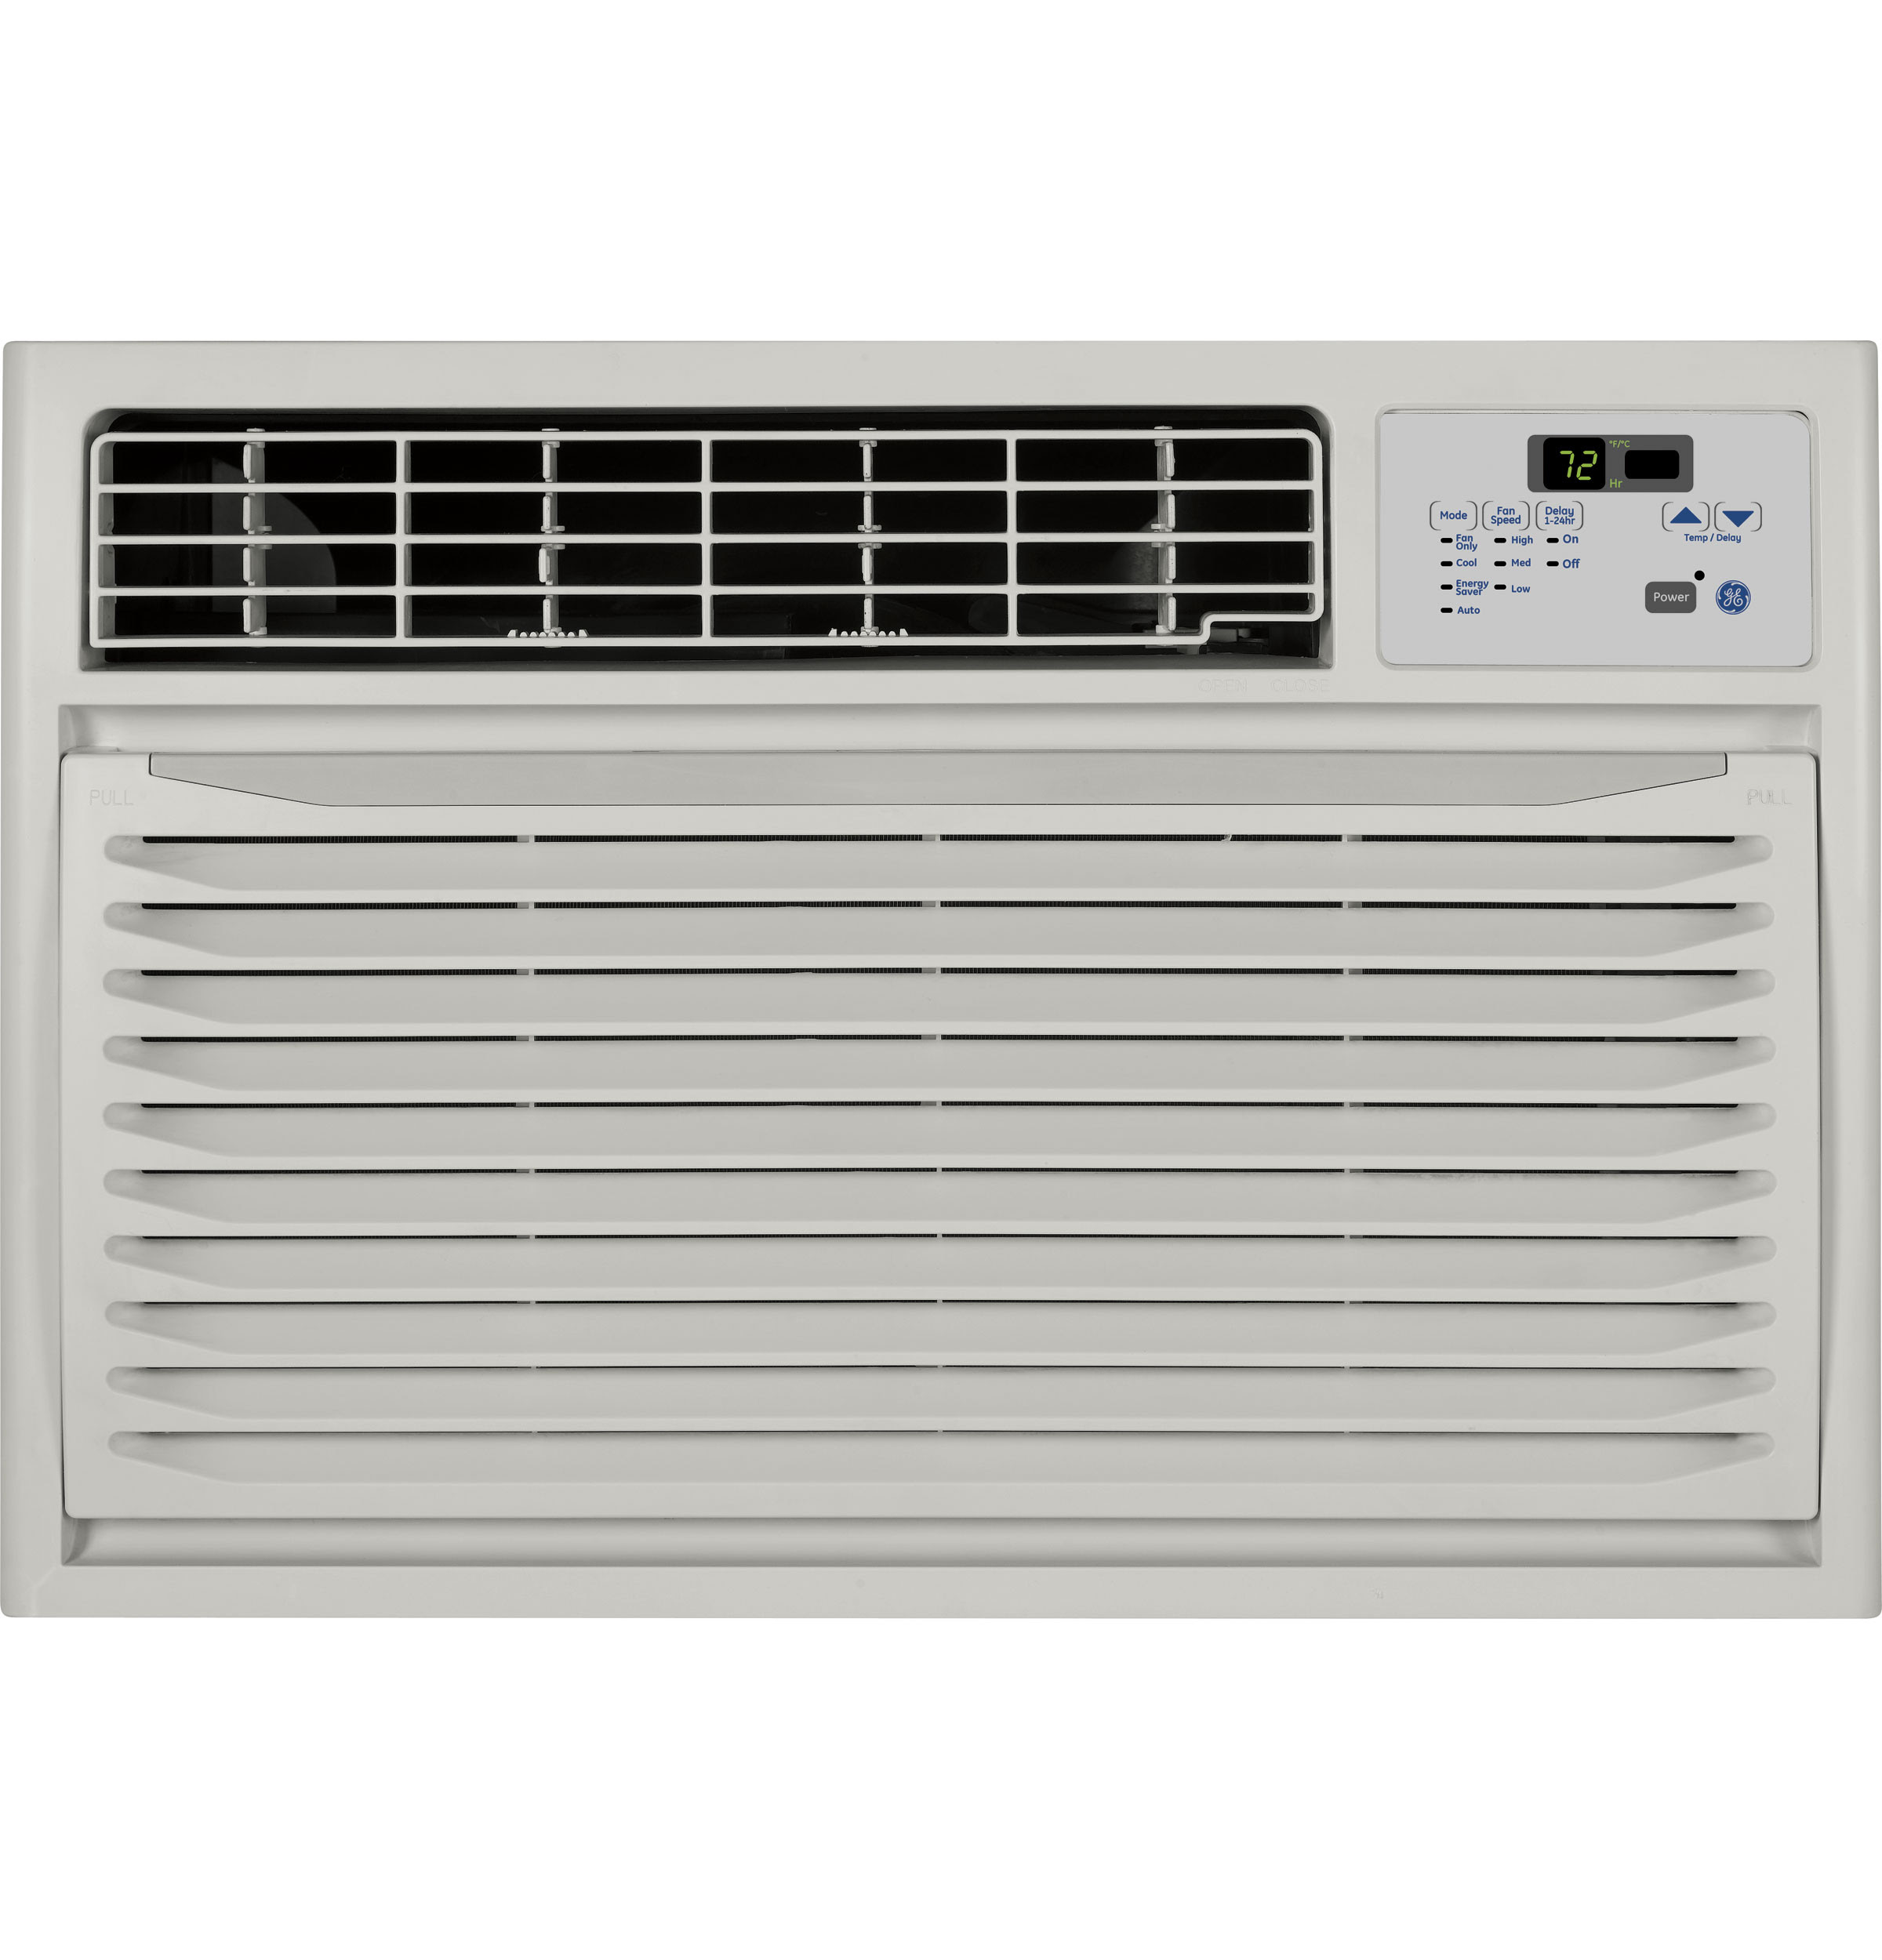 It is fitted with an antimicrobial filter that eliminates airborne contaminants like pollen, dust mites, and bacteria. Air Conditioner Canada Canada S 1 Source For Airconditioners We Provide Top Quality Air Conditioners At Unbeatable Prices